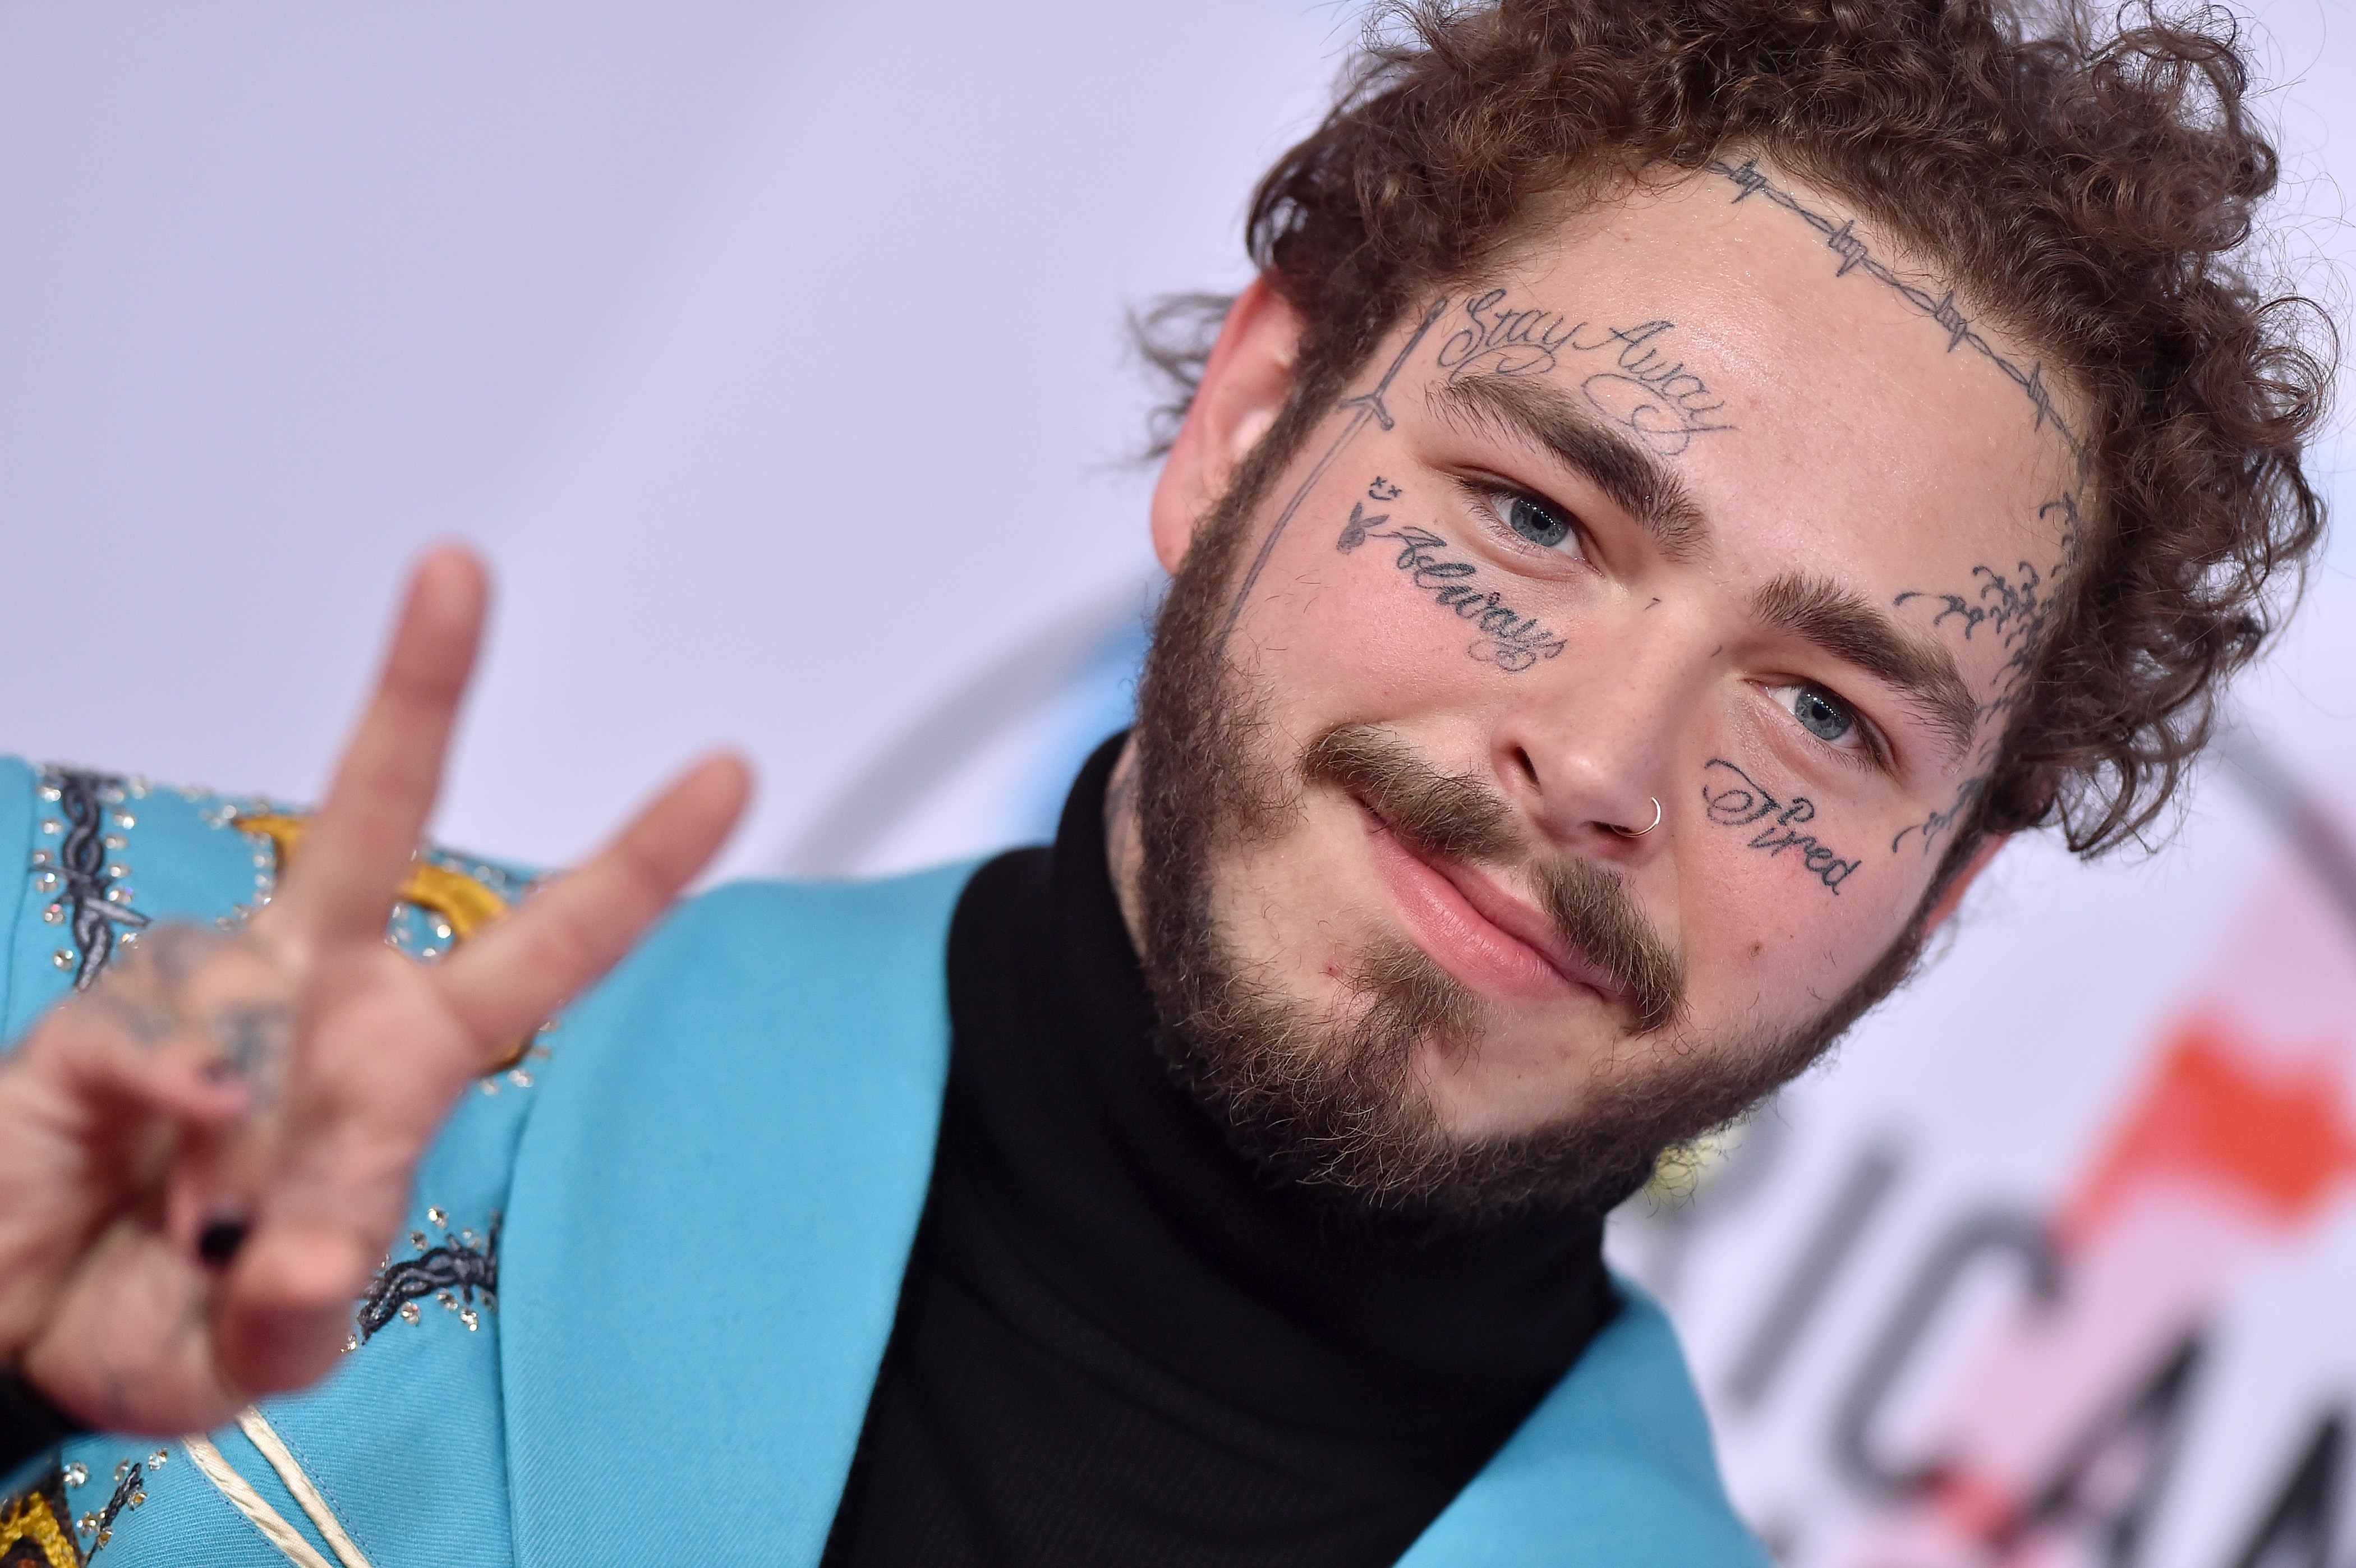 Details 77 post malone no face tattoos best  thtantai2